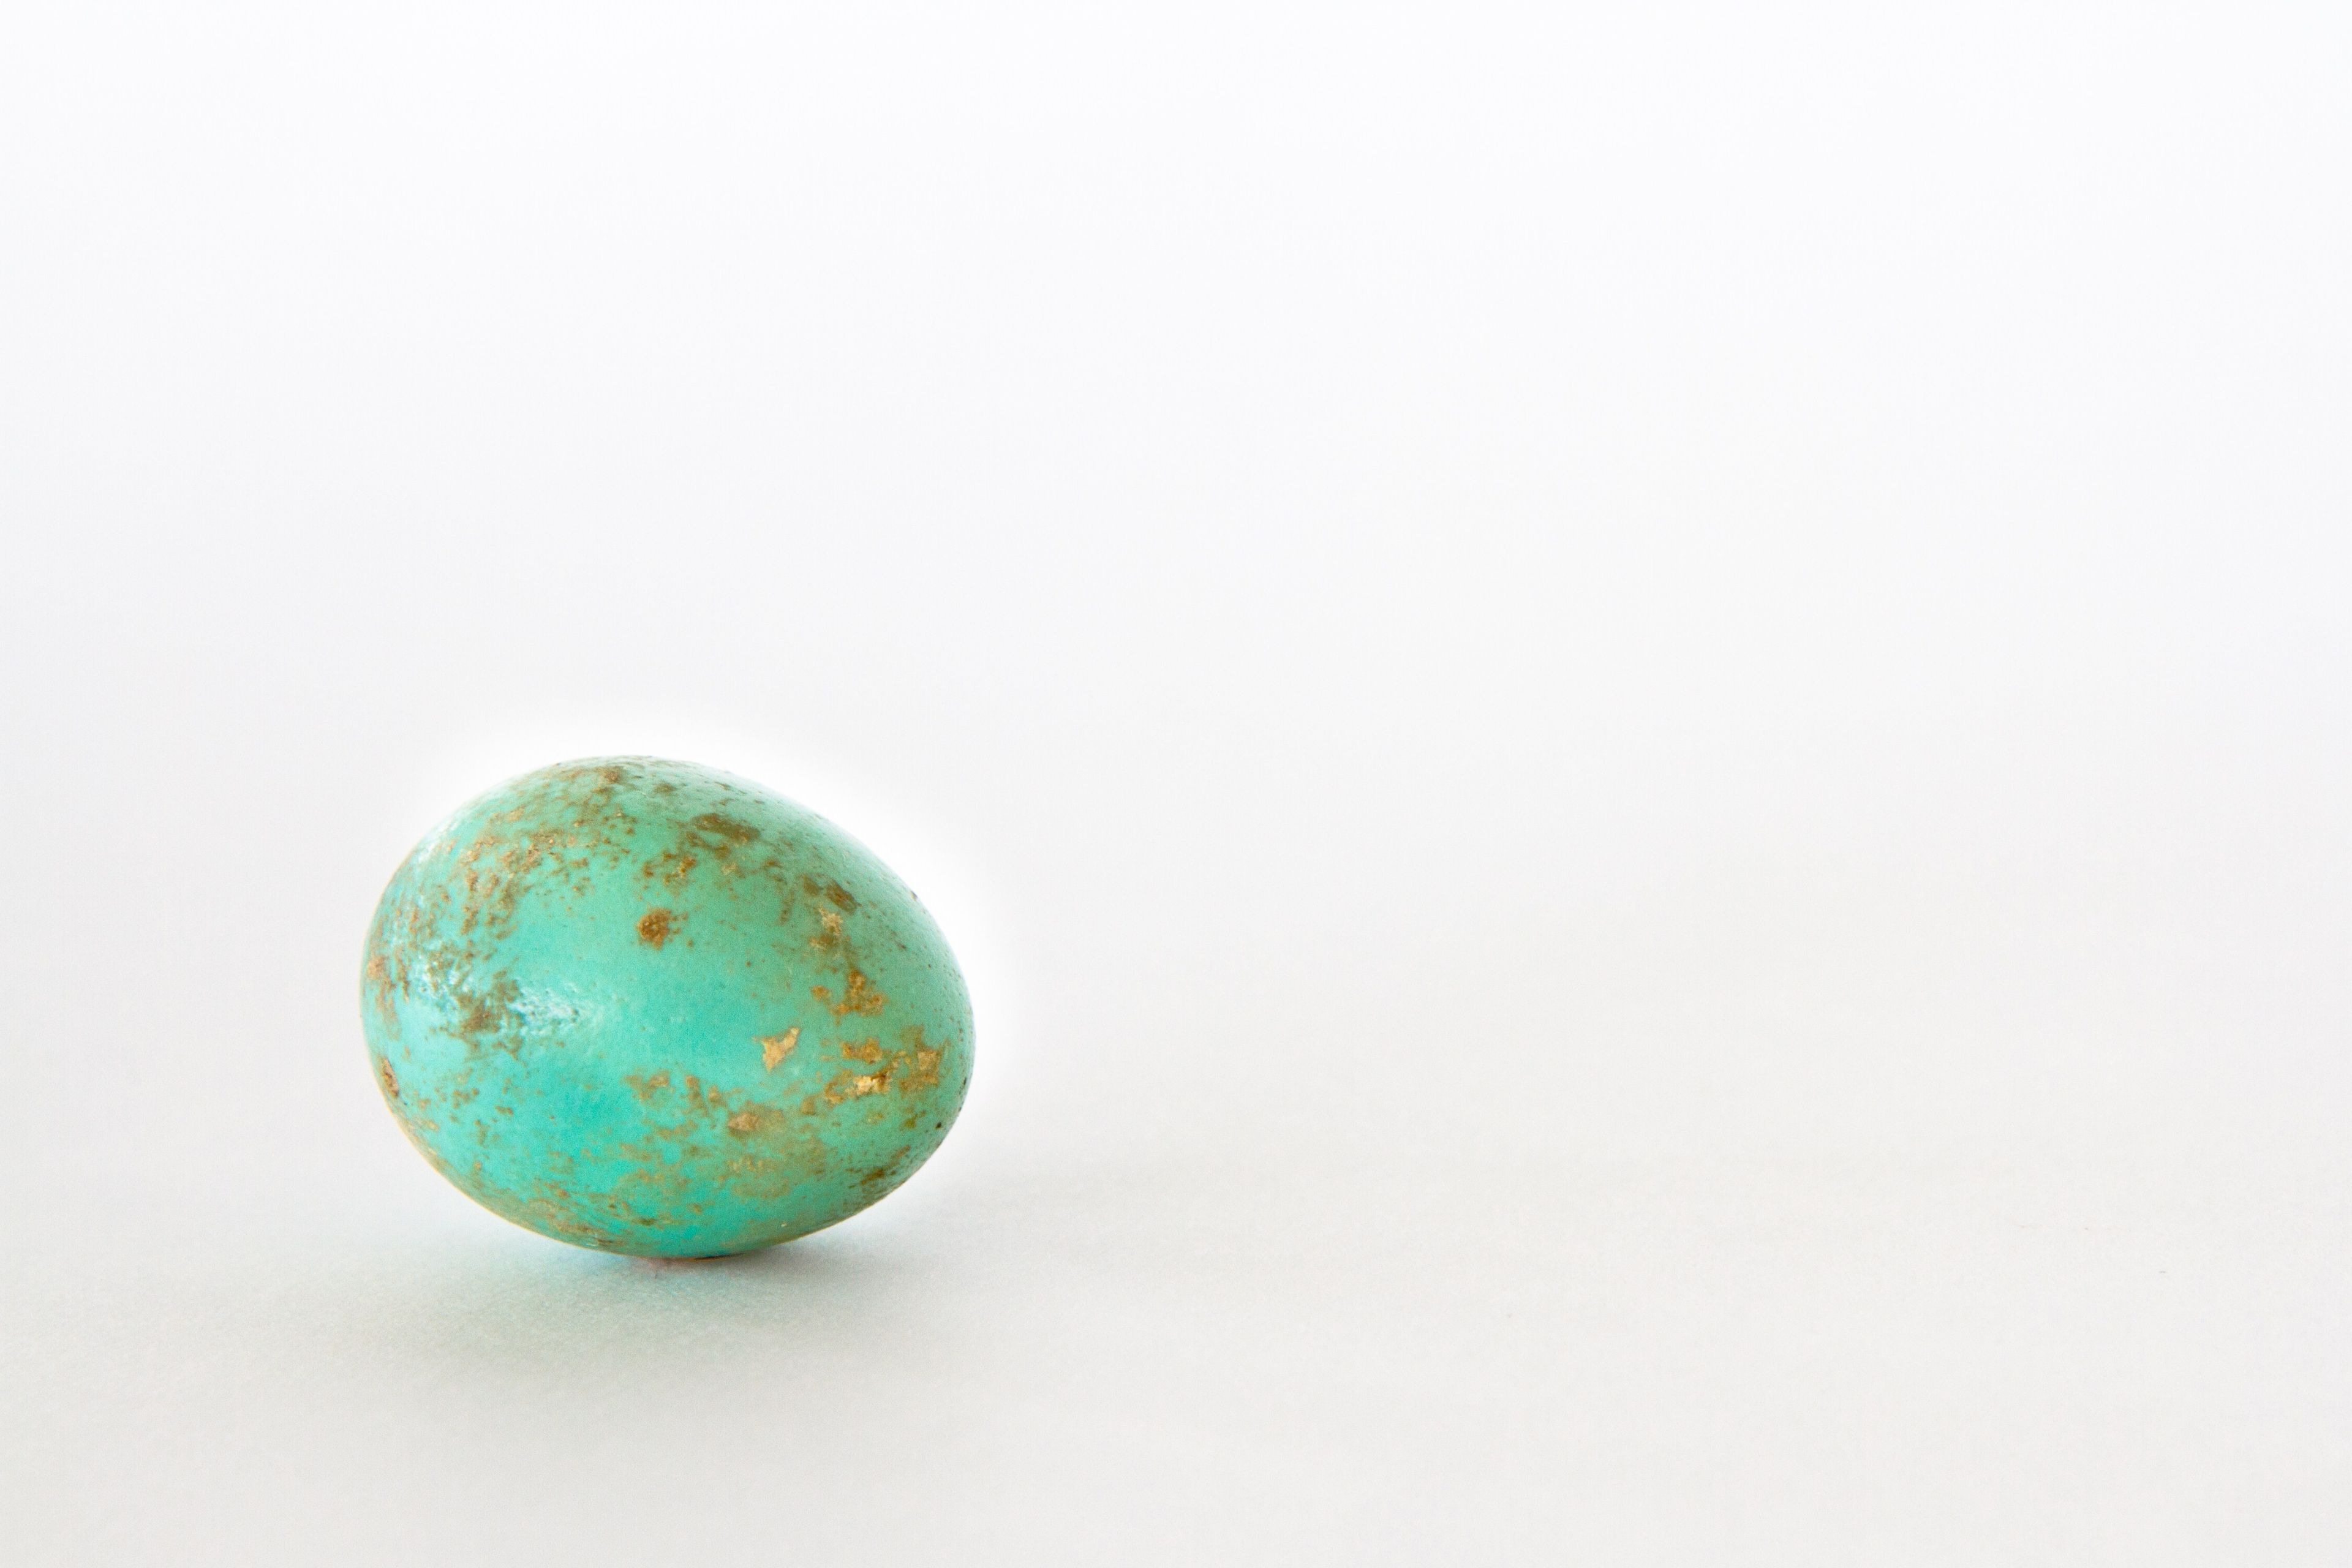 A blue and gold Easter egg resting on a white background.